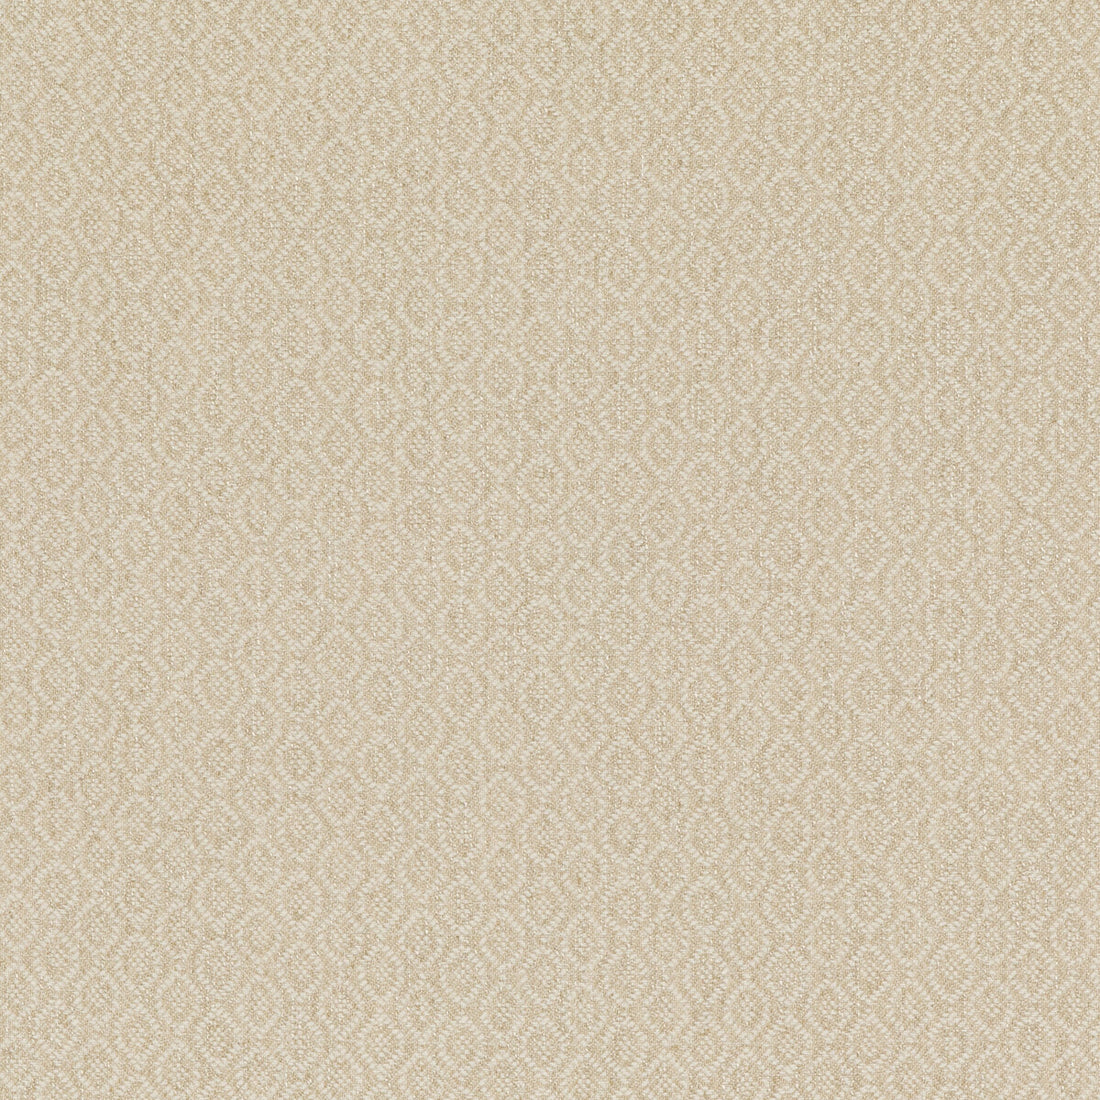 Orchard fabric in parchment color - pattern PF50488.225.0 - by Baker Lifestyle in the Block Weaves collection